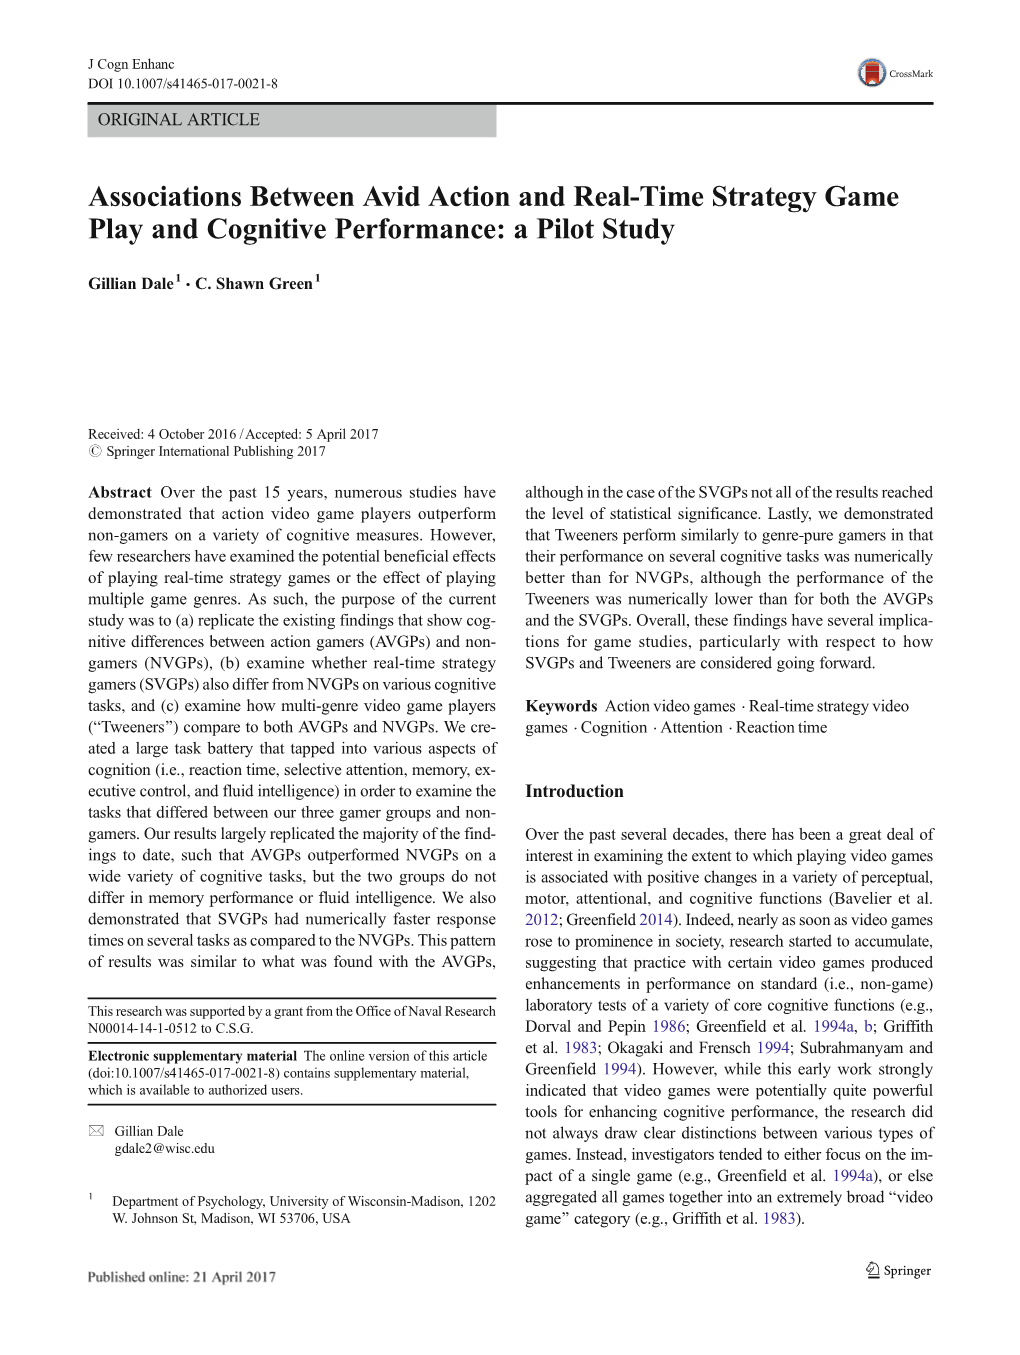 Associations Between Avid Action and Real-Time Strategy Game Play and Cognitive Performance: a Pilot Study